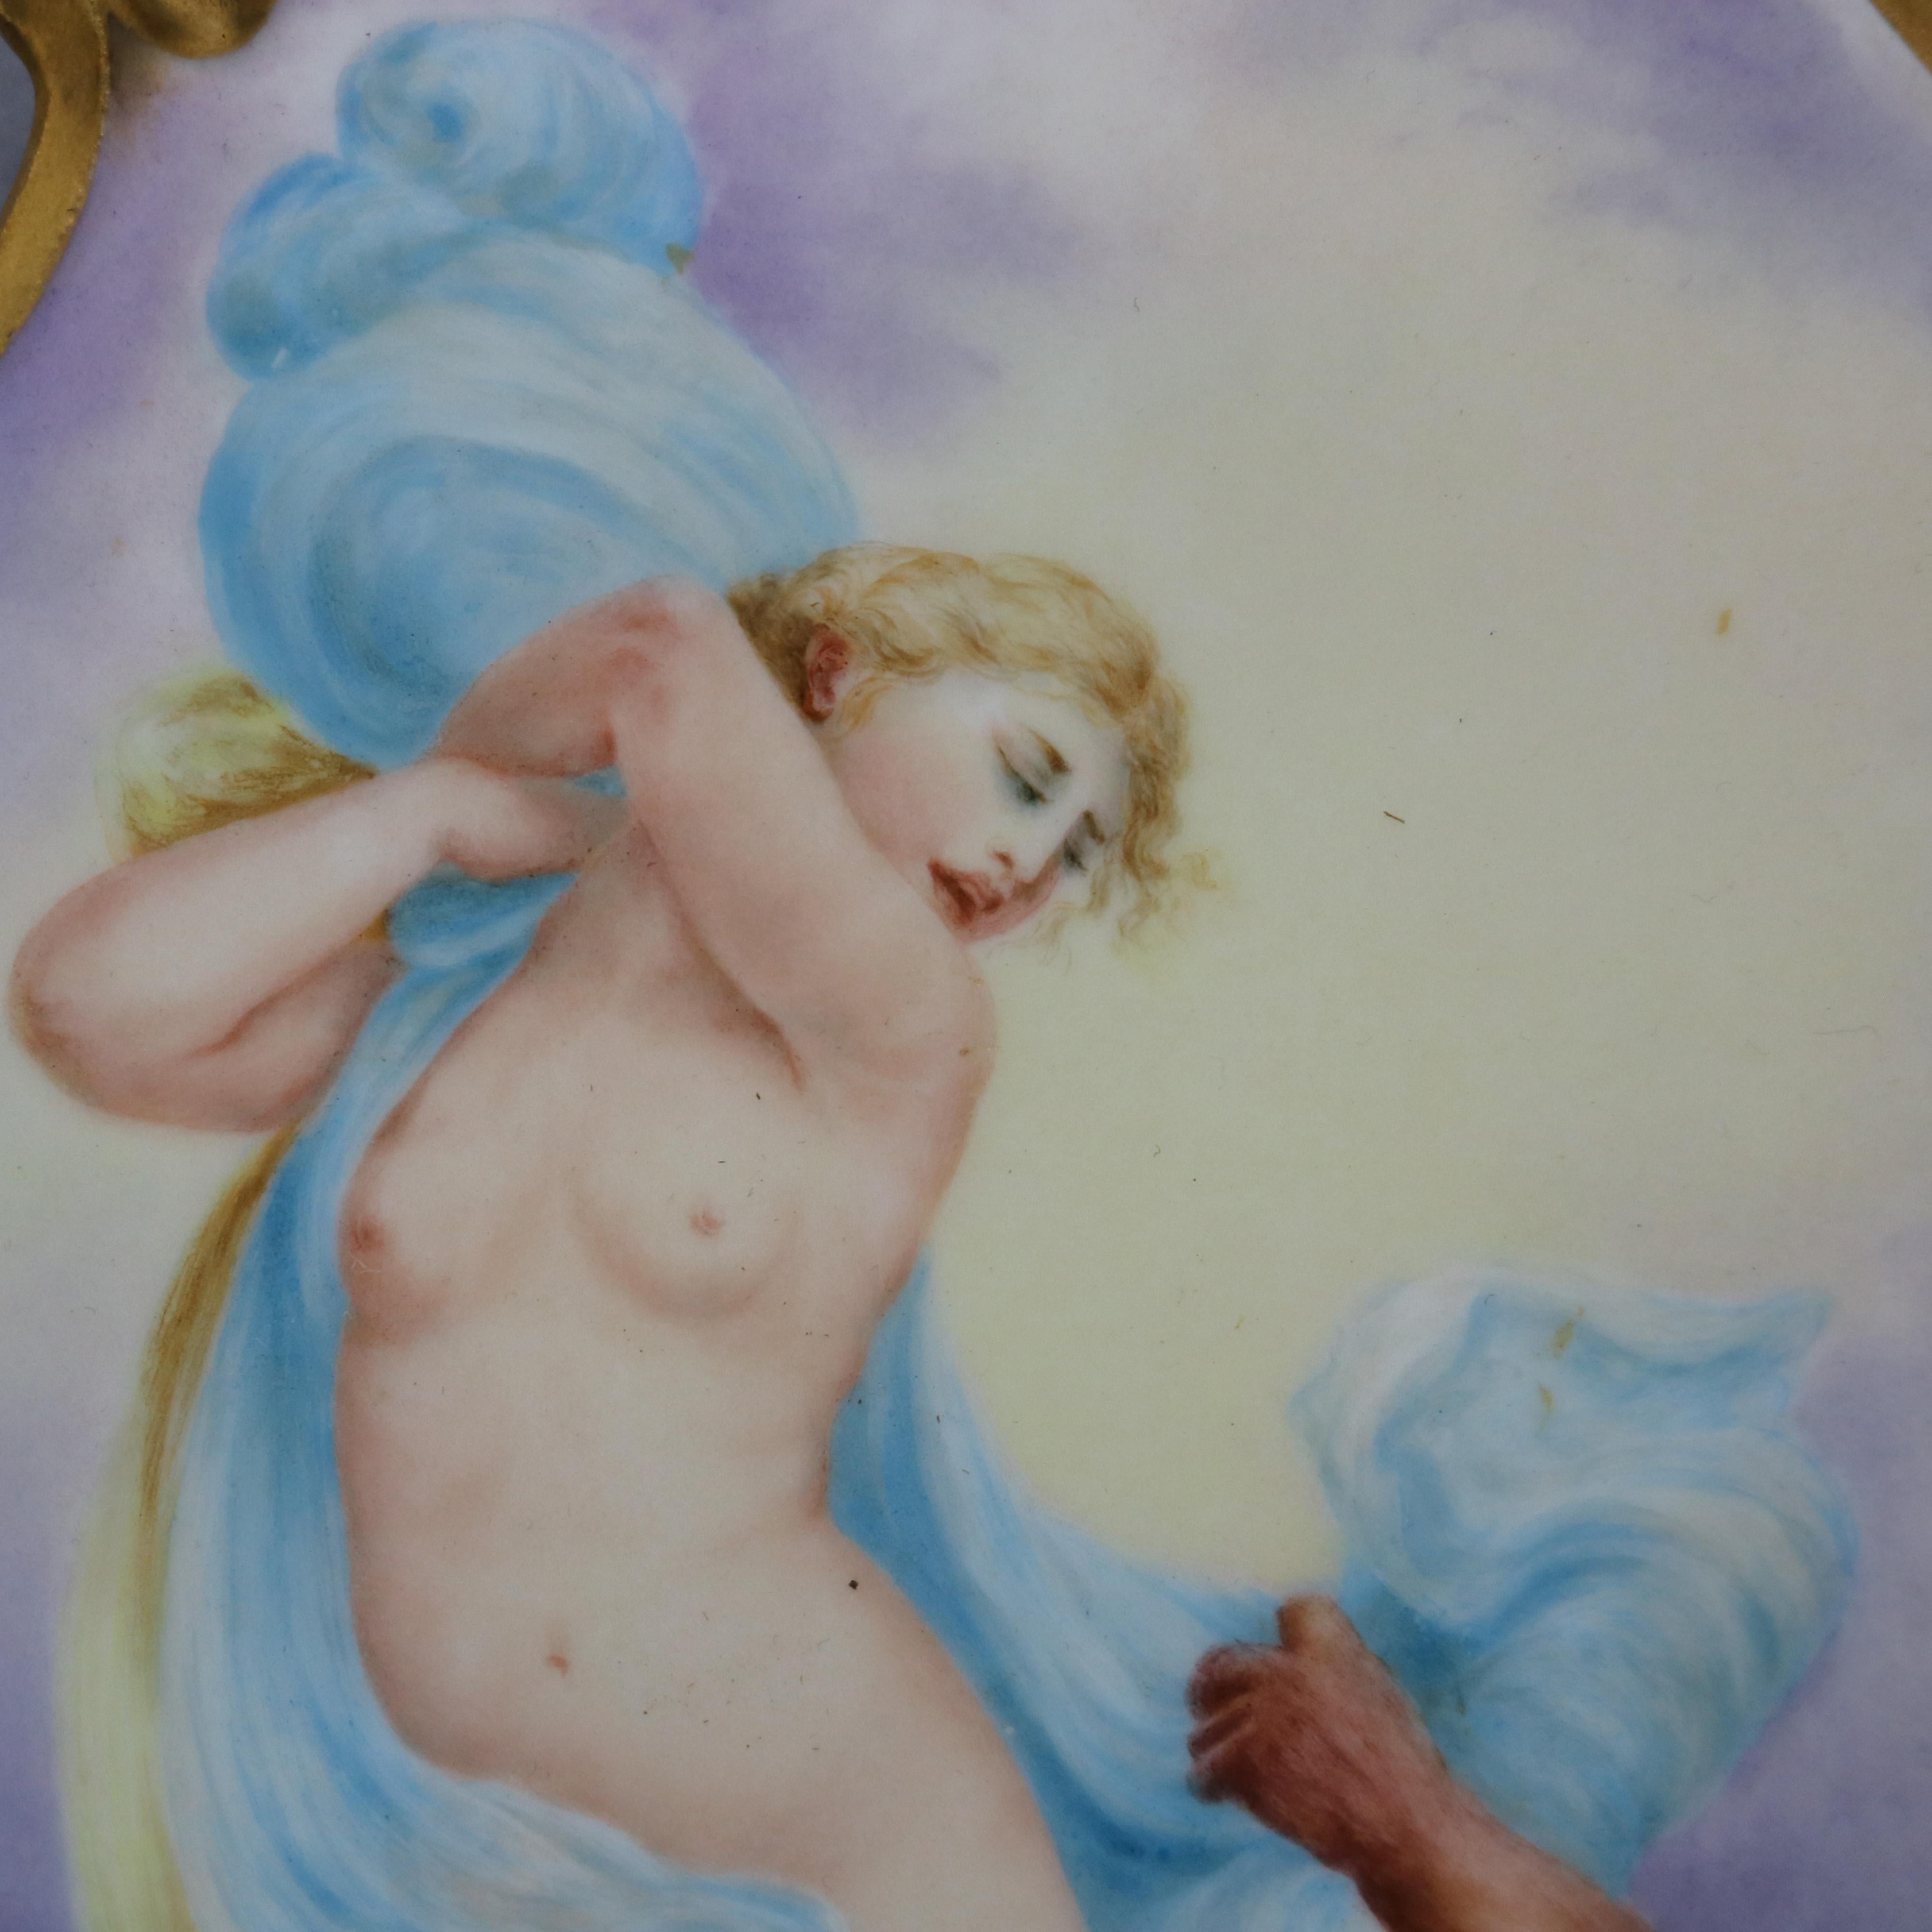 Hand-Painted Antique Limoges Porcelain Hand Painted Plaque, Nymph & Mermaids by E. Meyer 1898